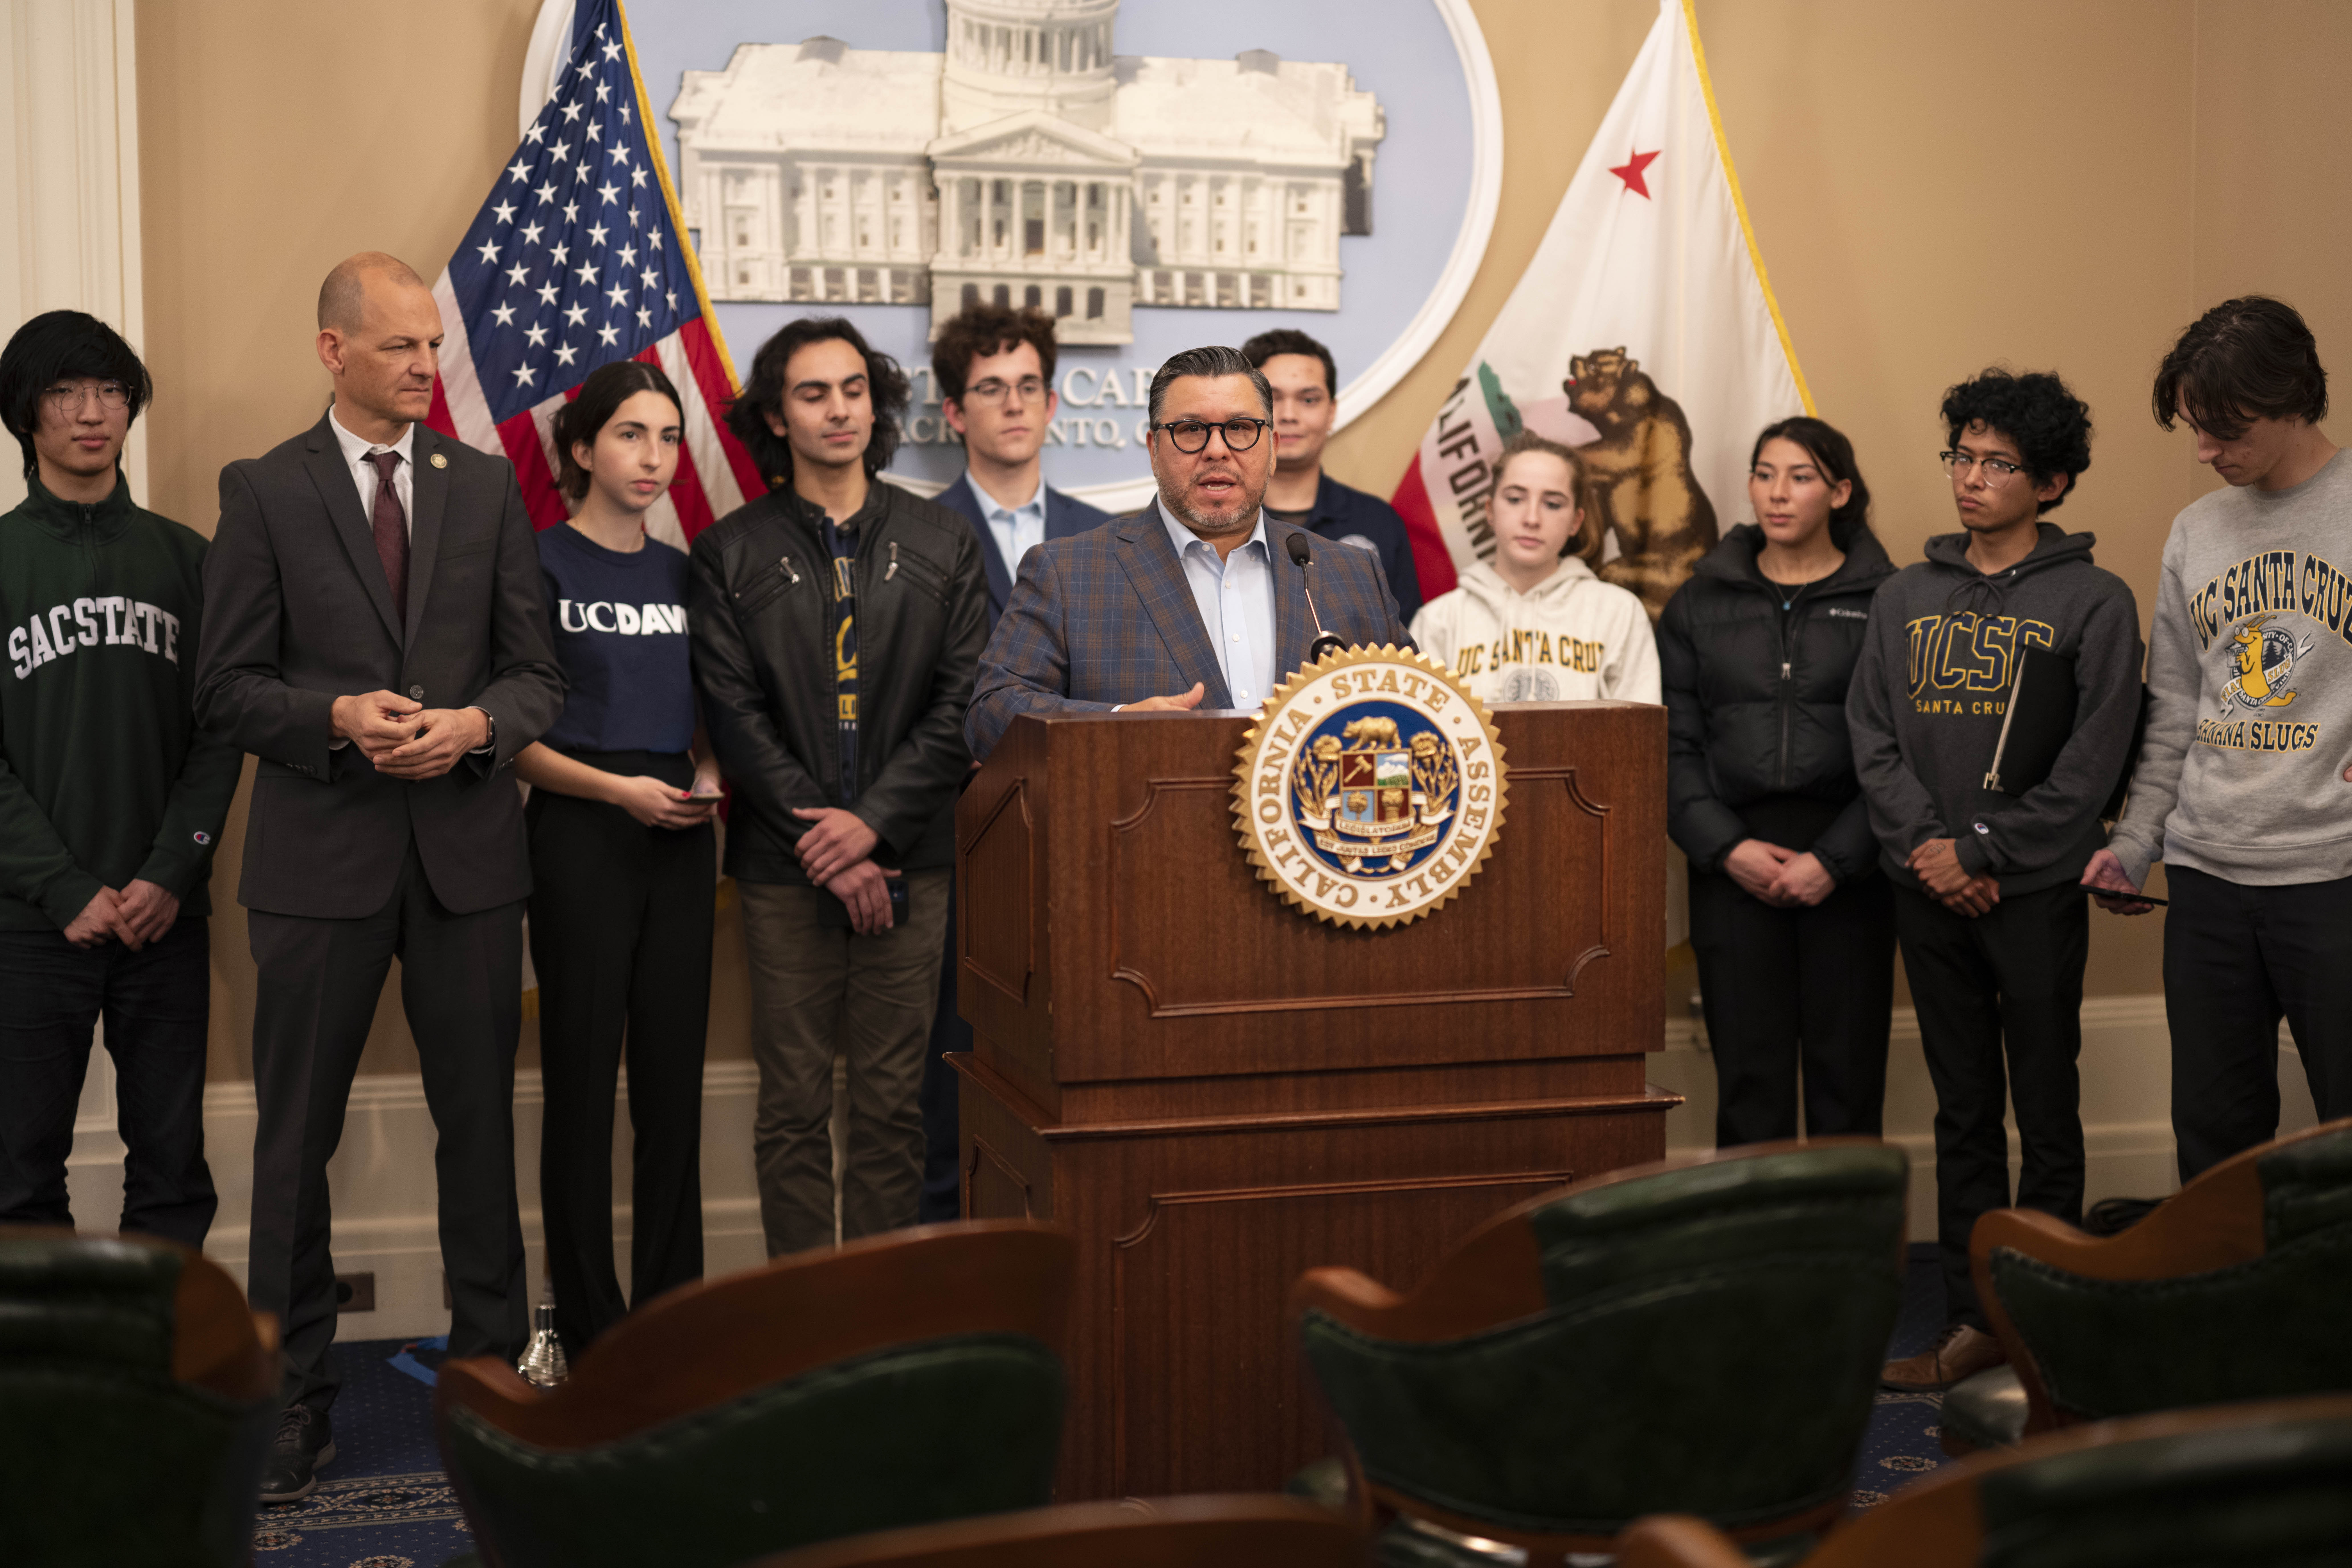 Assemblymember Garcia and Student Housing Advocates at AB 1630 Rally